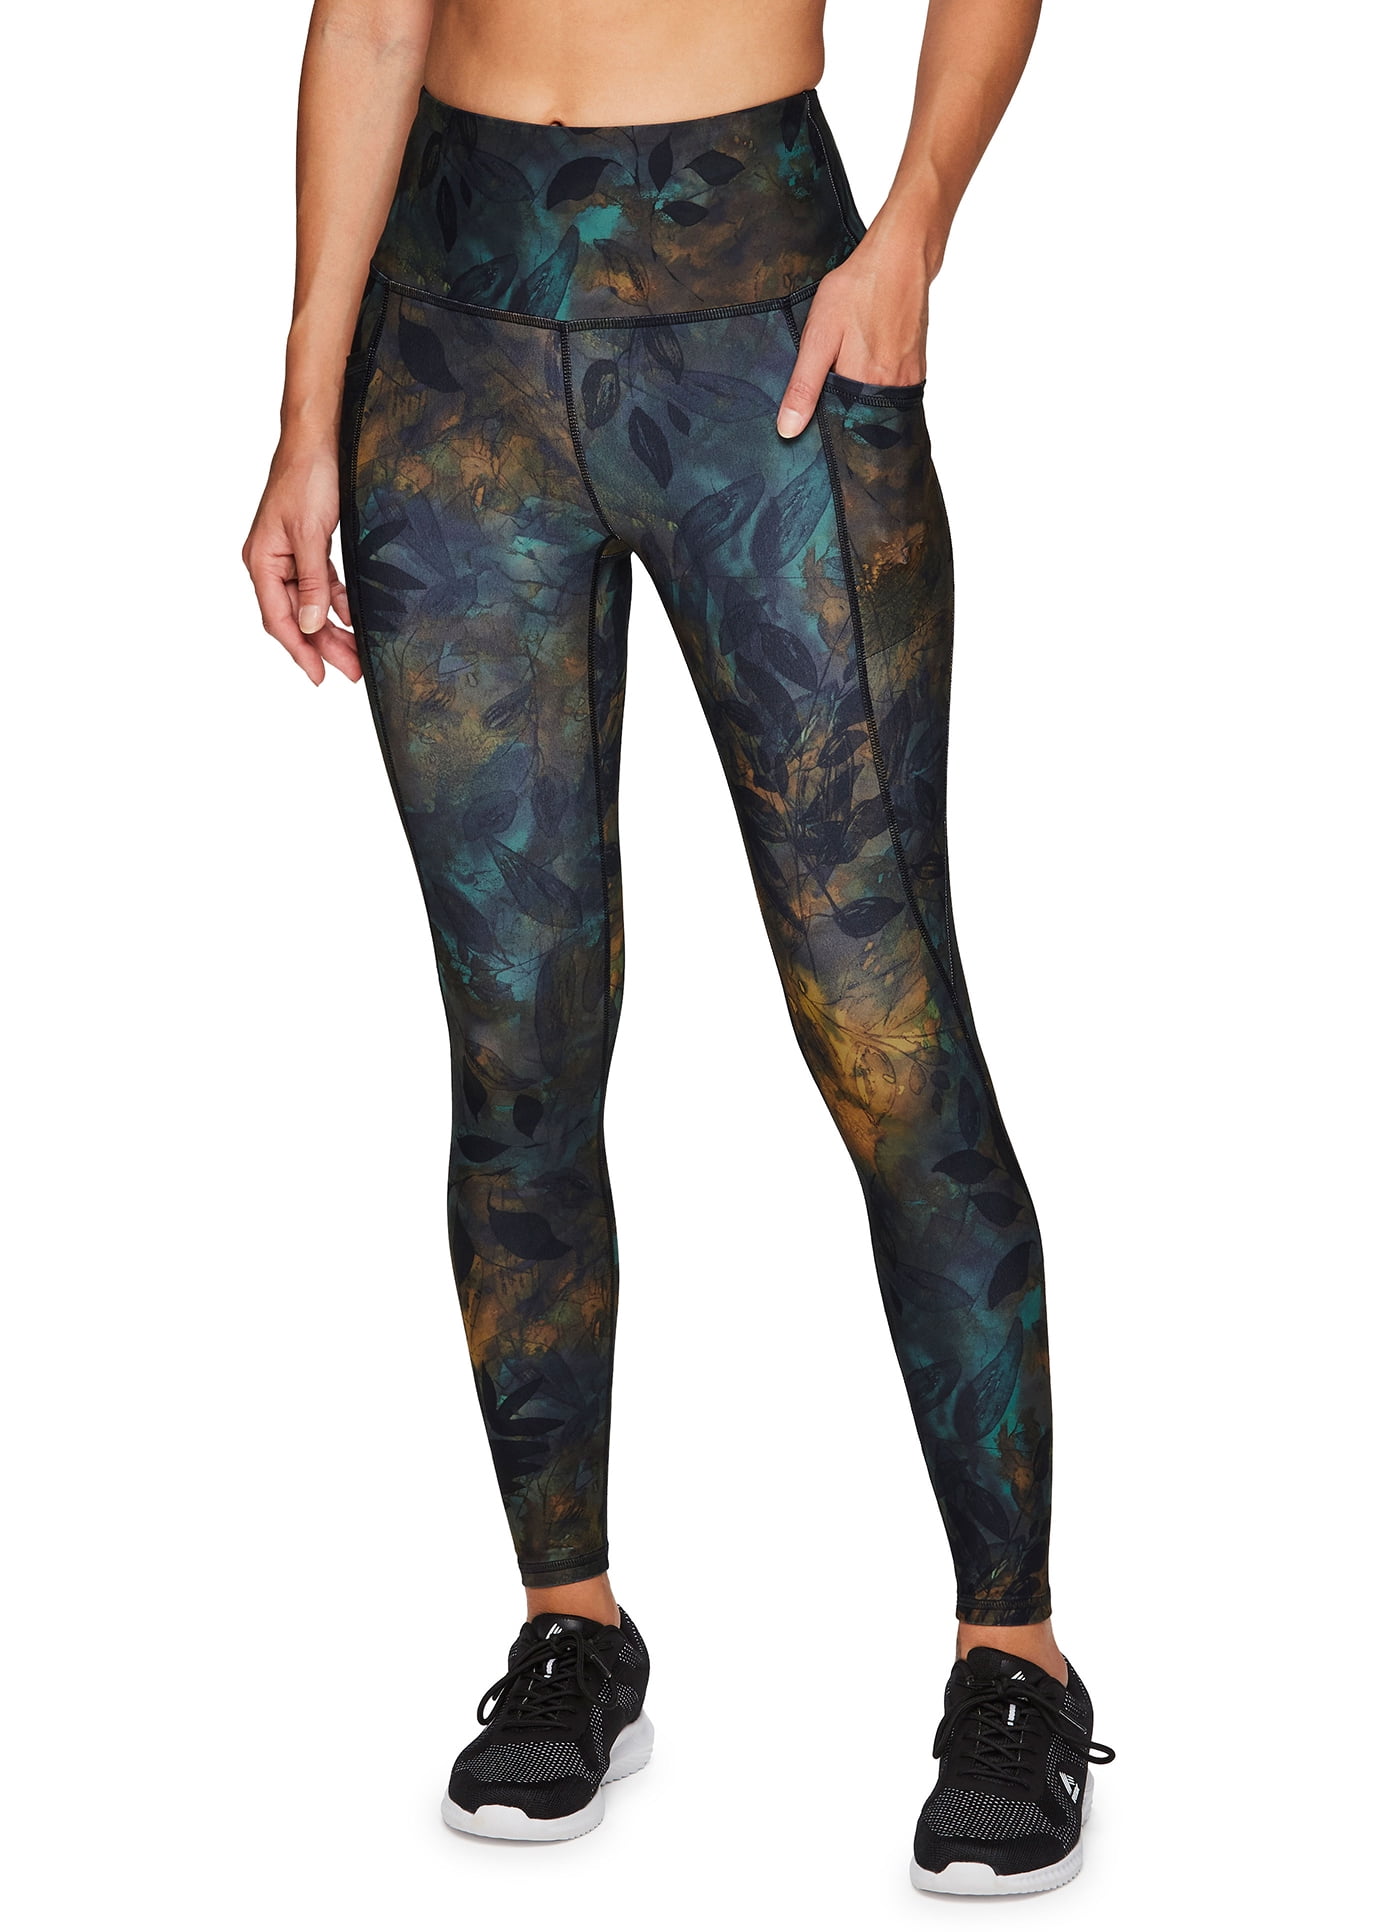 Womens Camouflage Floral Swatch with Watercolor Workout Running Leggings Tummy Control Sportswear Yoga Pants with Pockets